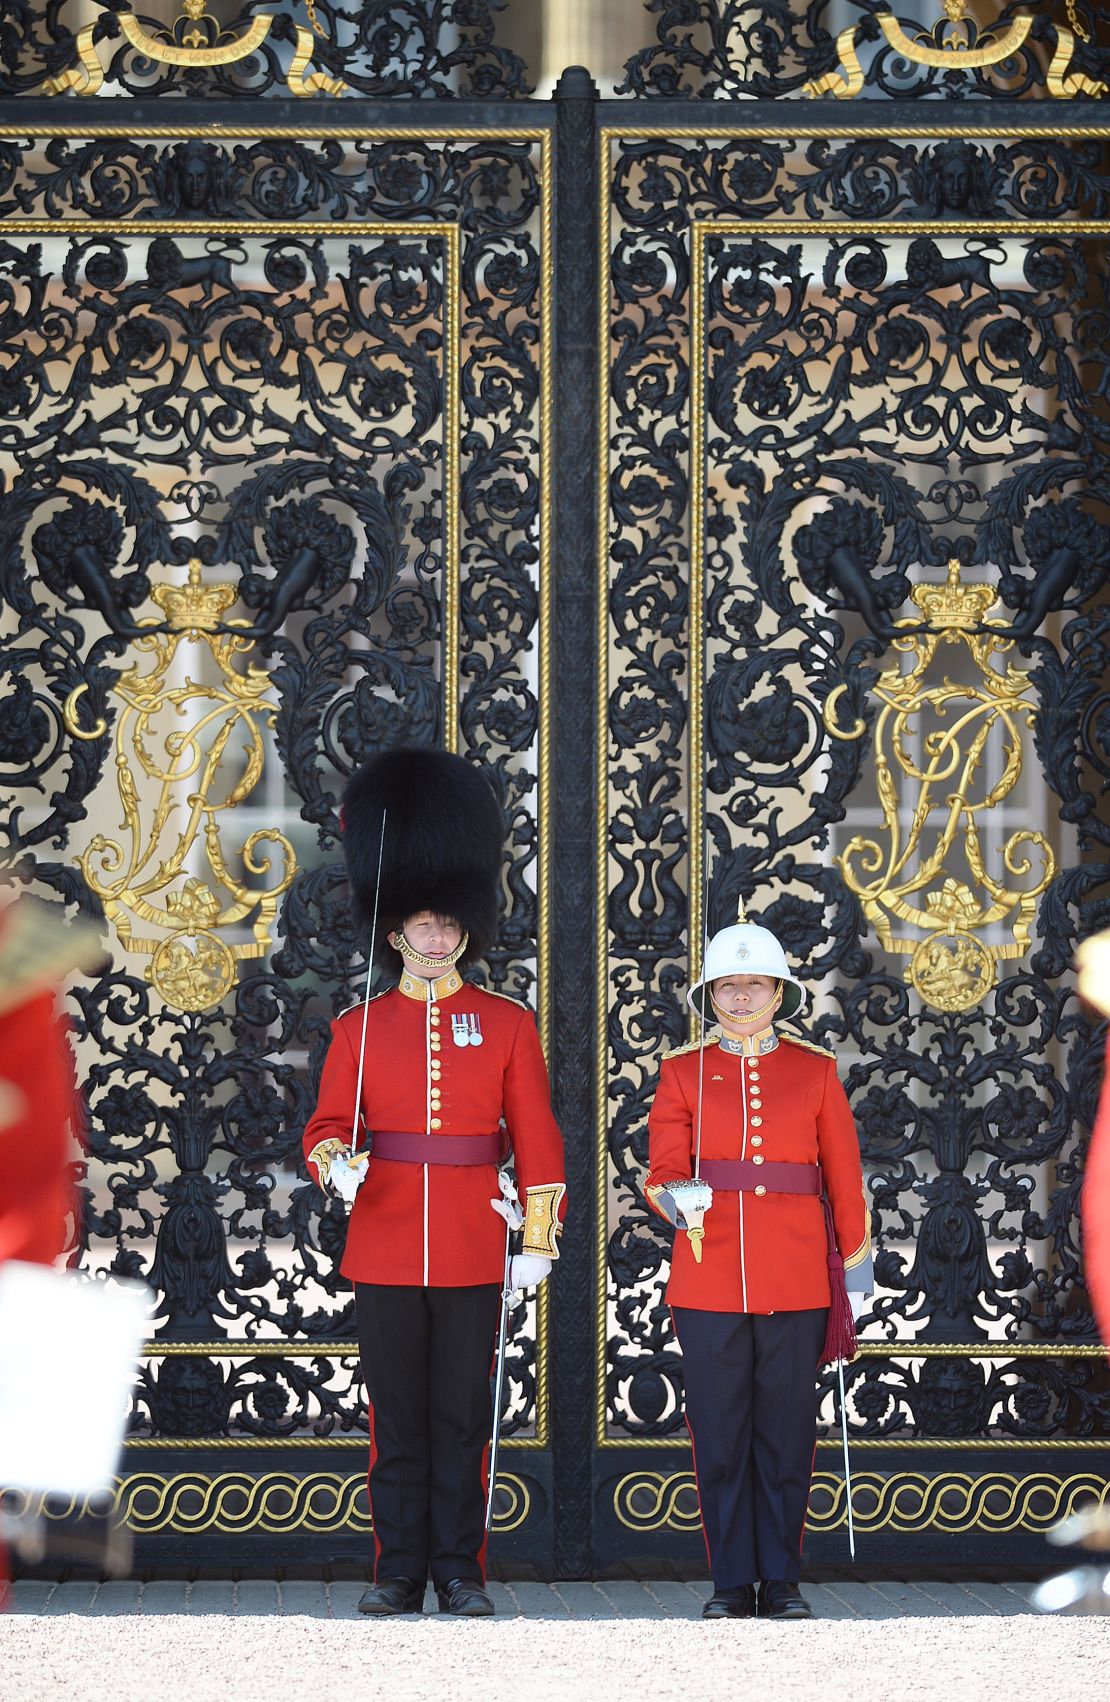 Captain Megan Couto (right) of the 2nd Battalion, Princess Patricia's Canadian Light Infantry, makes history as she becomes the first female to command the Queen's Guard at Buckingham Palace on June 26, 2017 in London, England. 